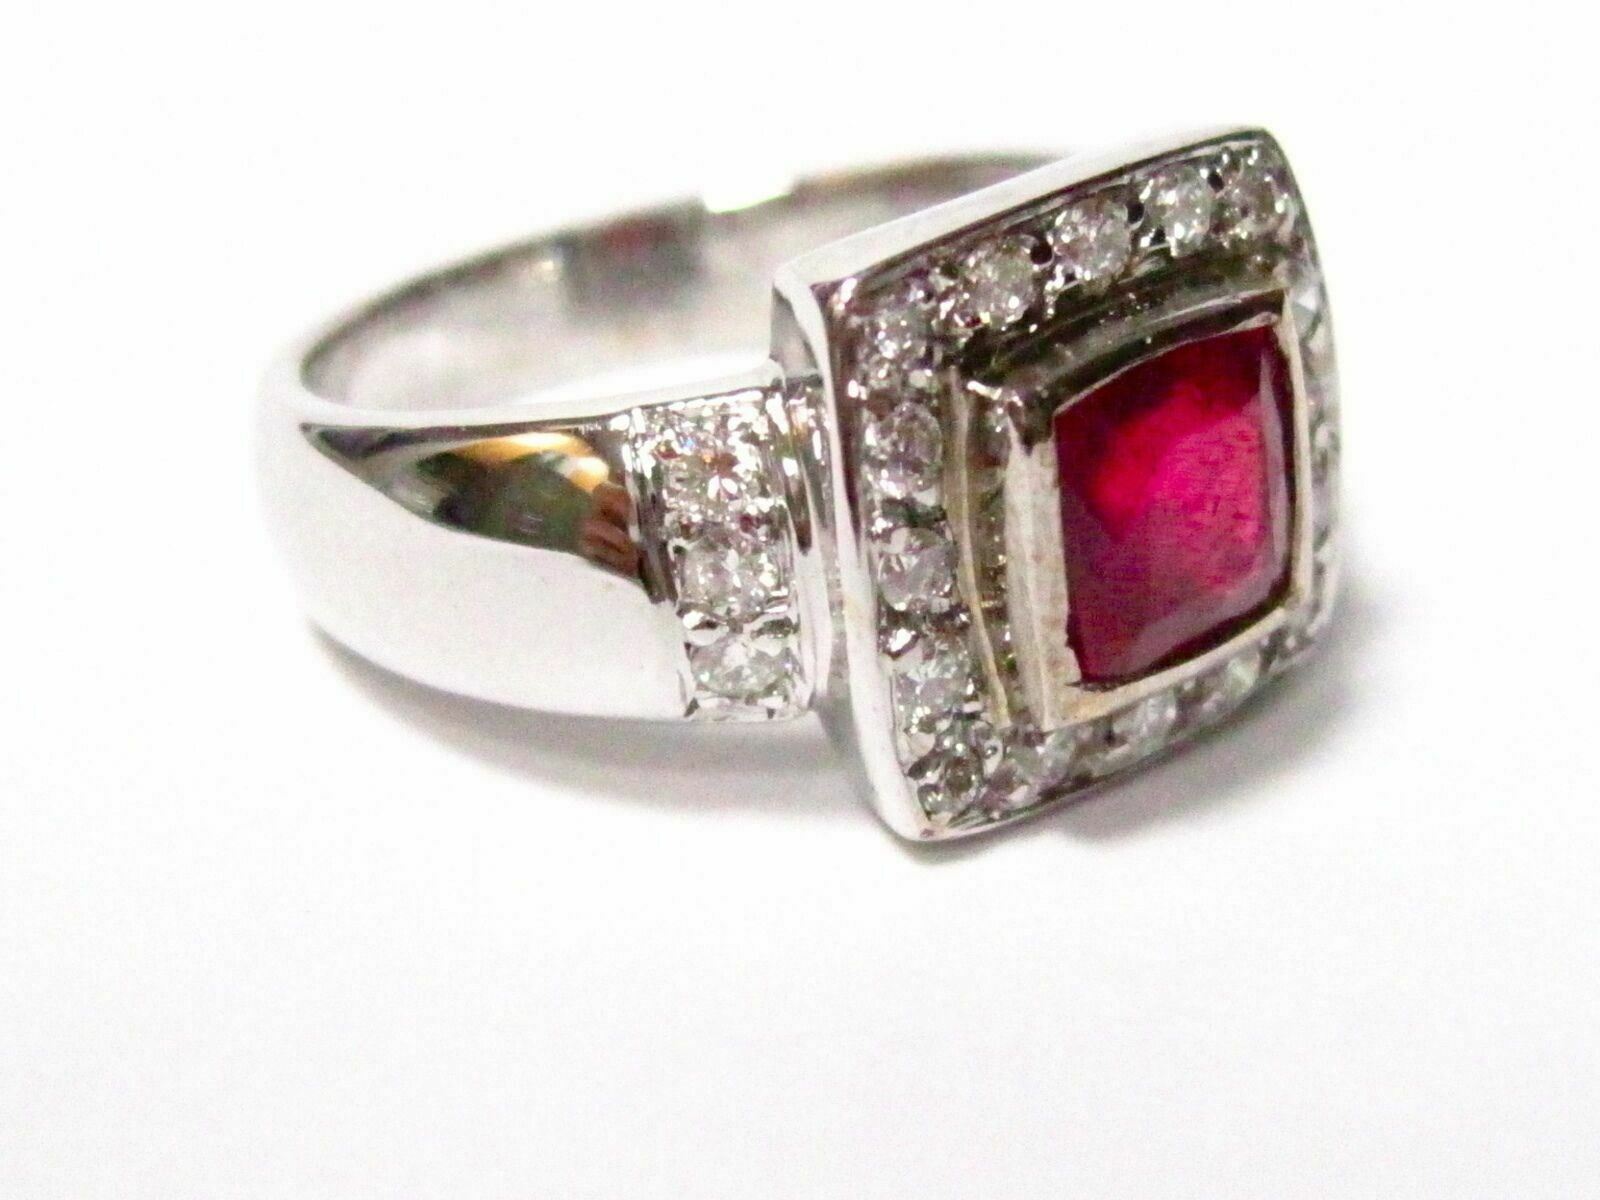 2.52 TCW Cushion Cut Ruby & Diamond Accents Solitaire Ring Size 8 14k White Gold